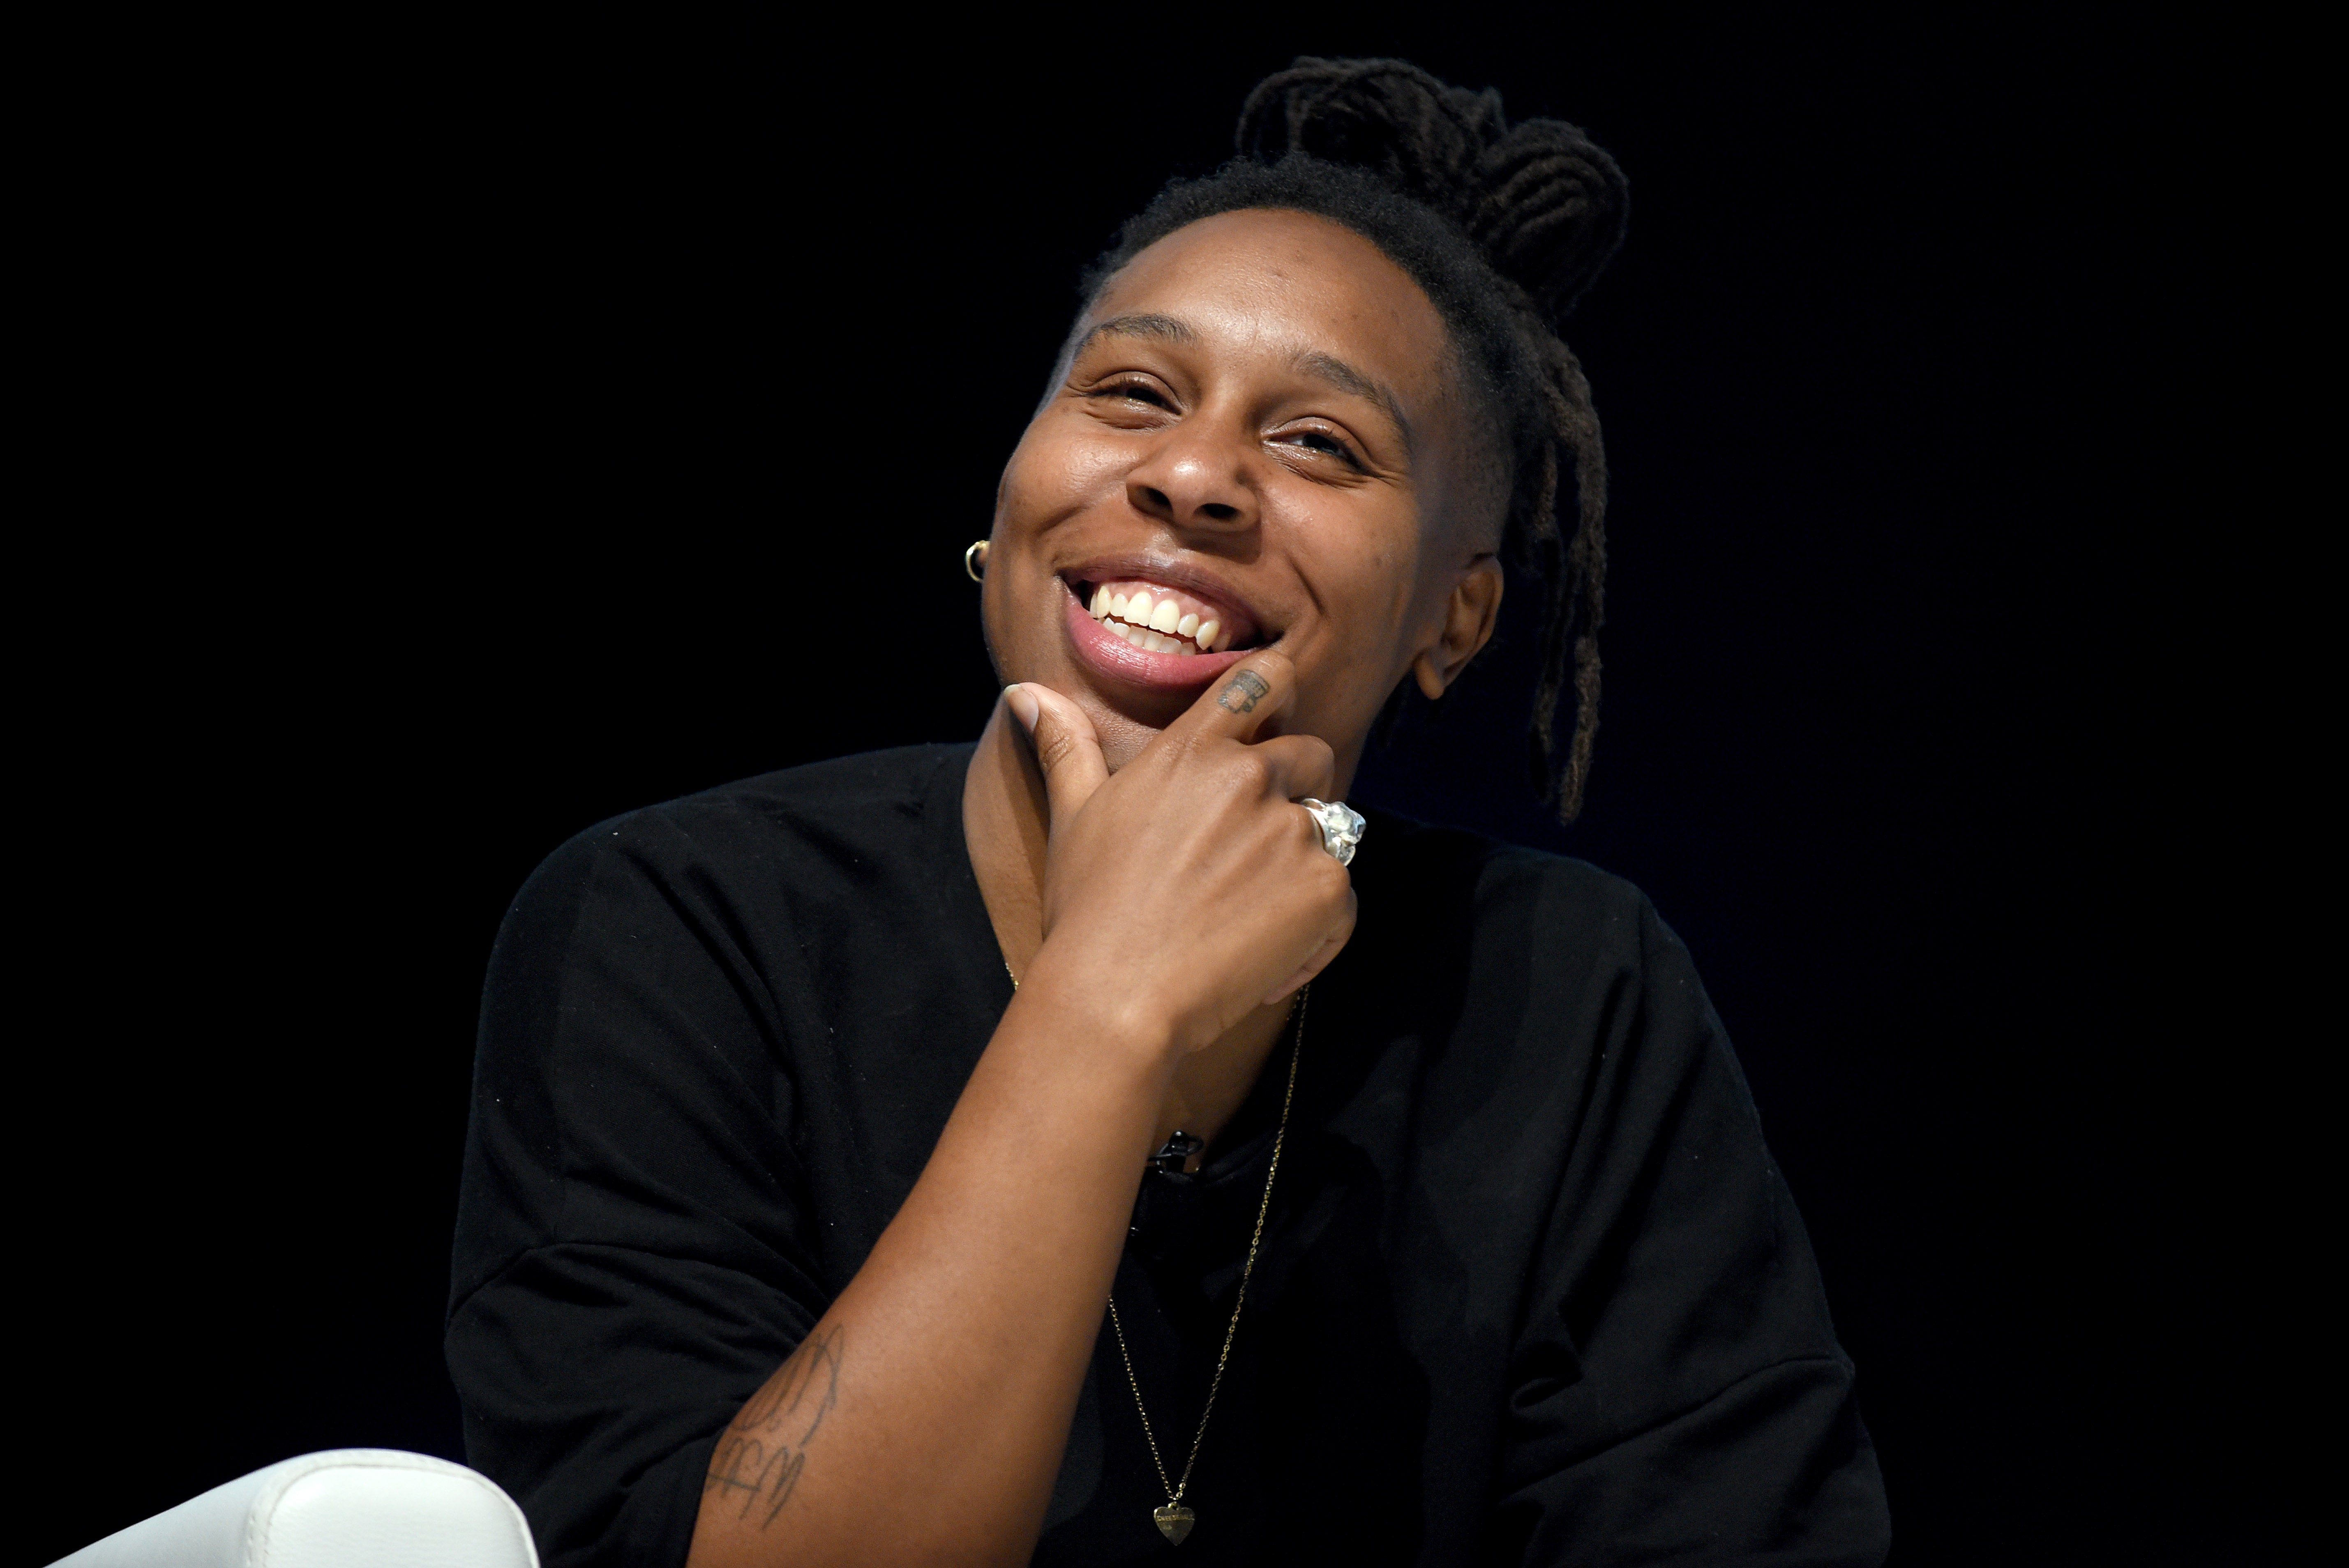 Lena Waithe Was Inspired To Write New Show 'The Chi' After Watching Another Chicago Gun Violence News Report
